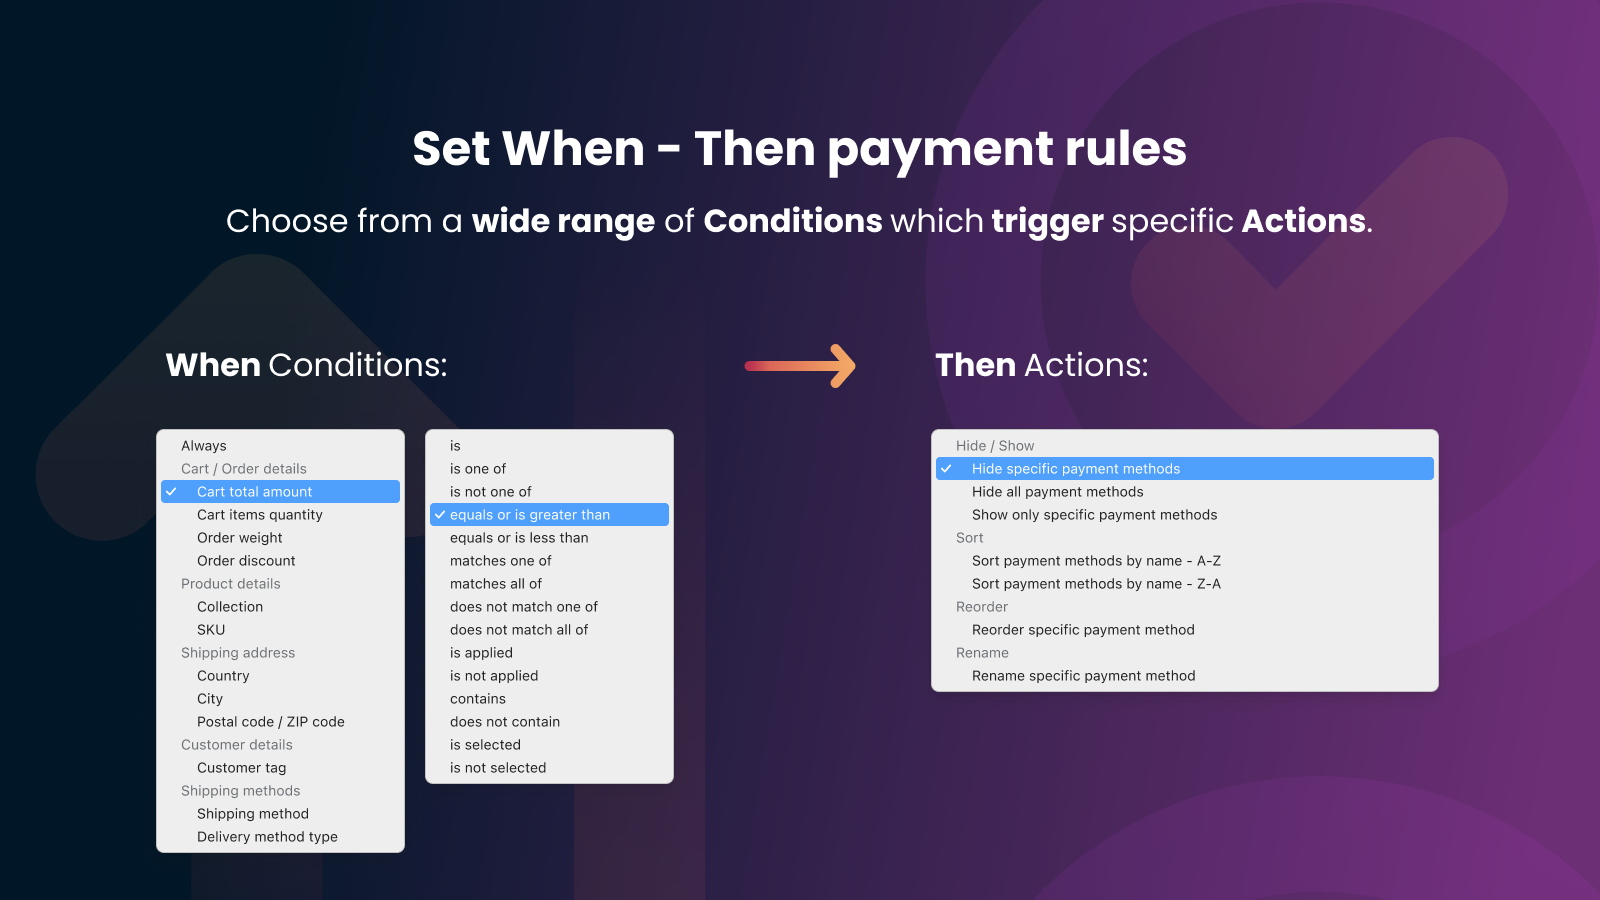 When-Then payment rules with various Conditions and Actions